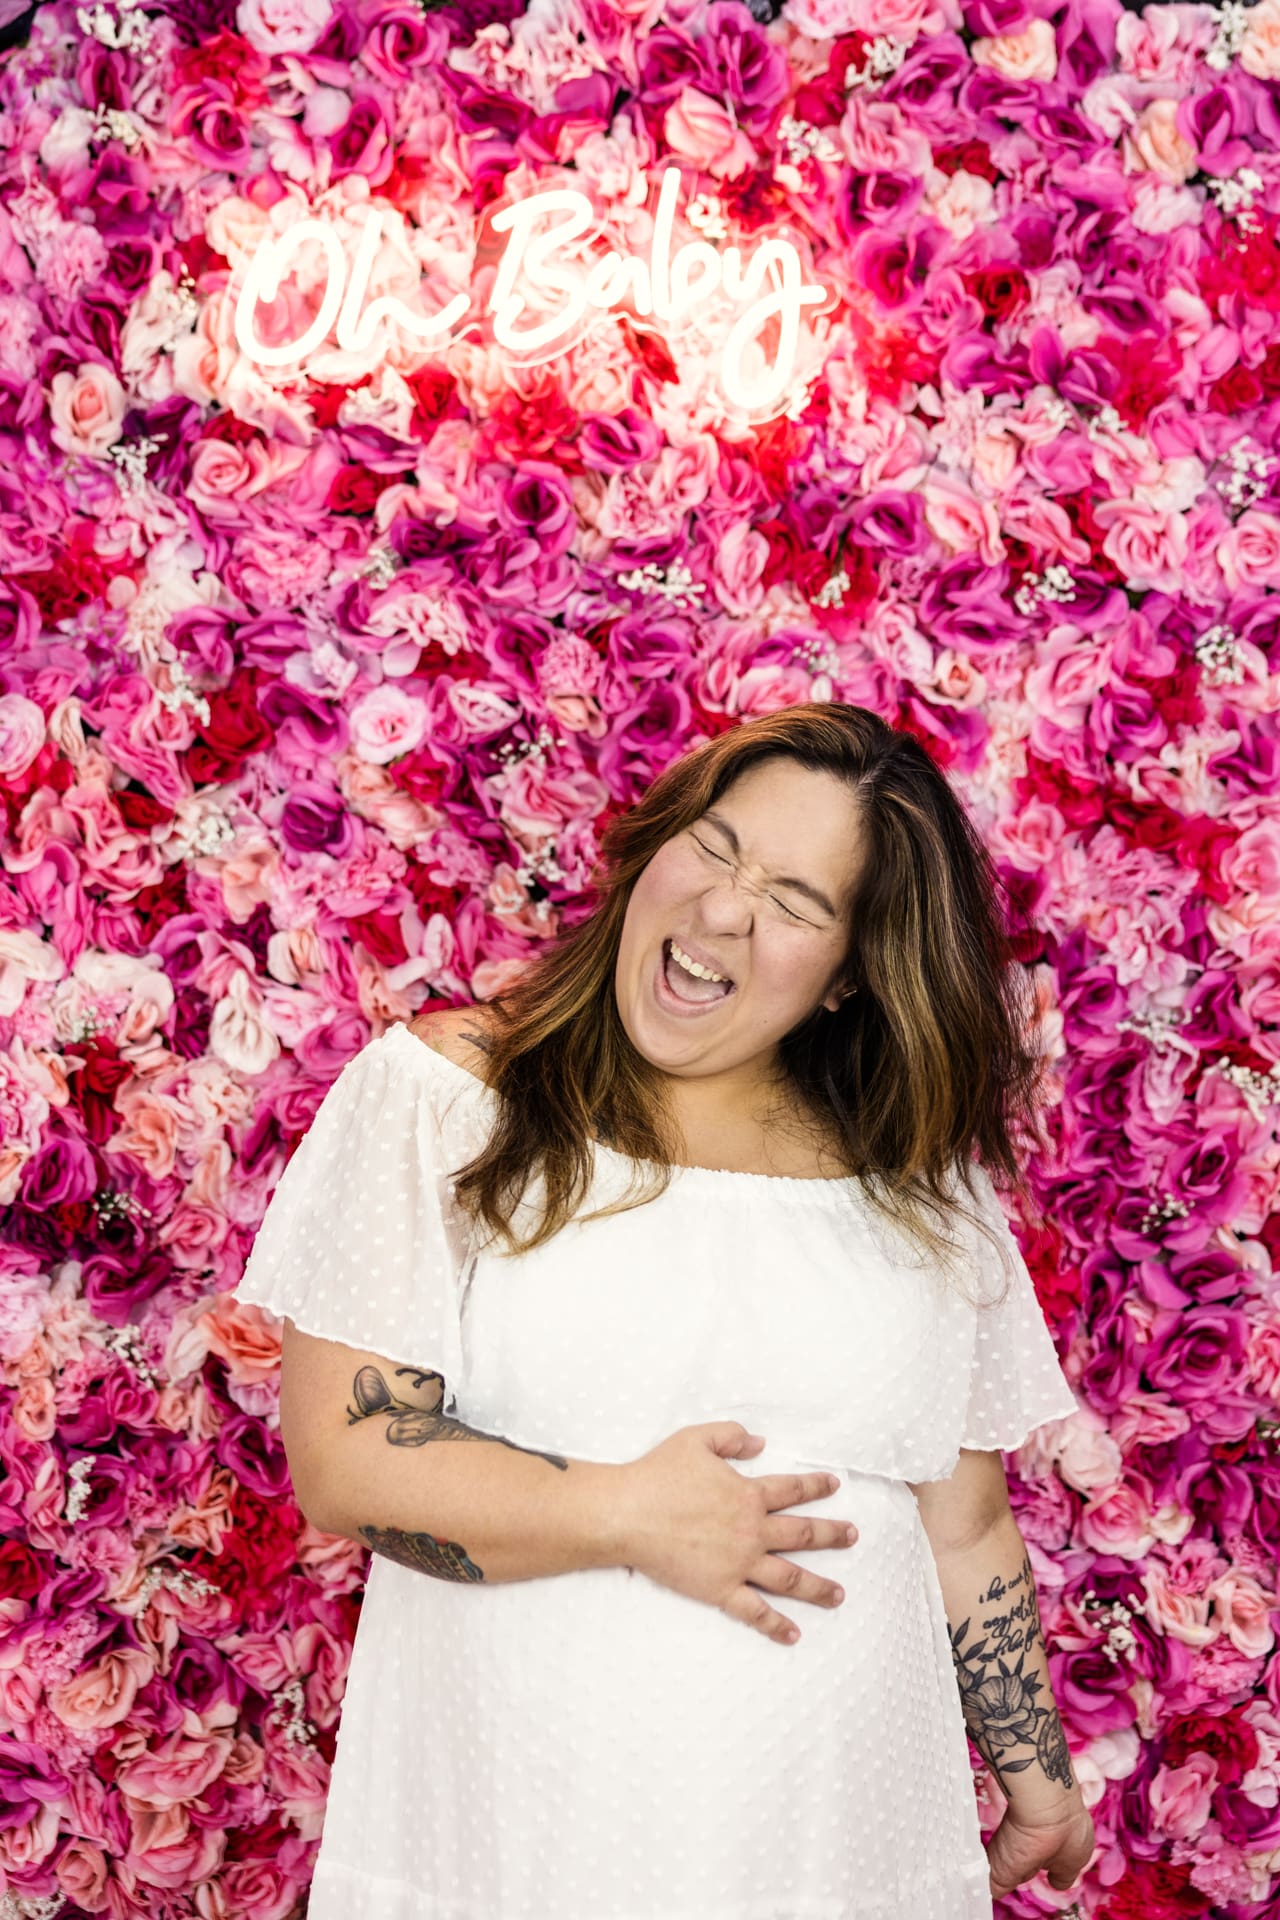 Candid photo of mom-to-be holding baby bump in front of pink flower wall with Oh Baby neon sign during maternity photoshoot at Chicago photography studio P&M Studio